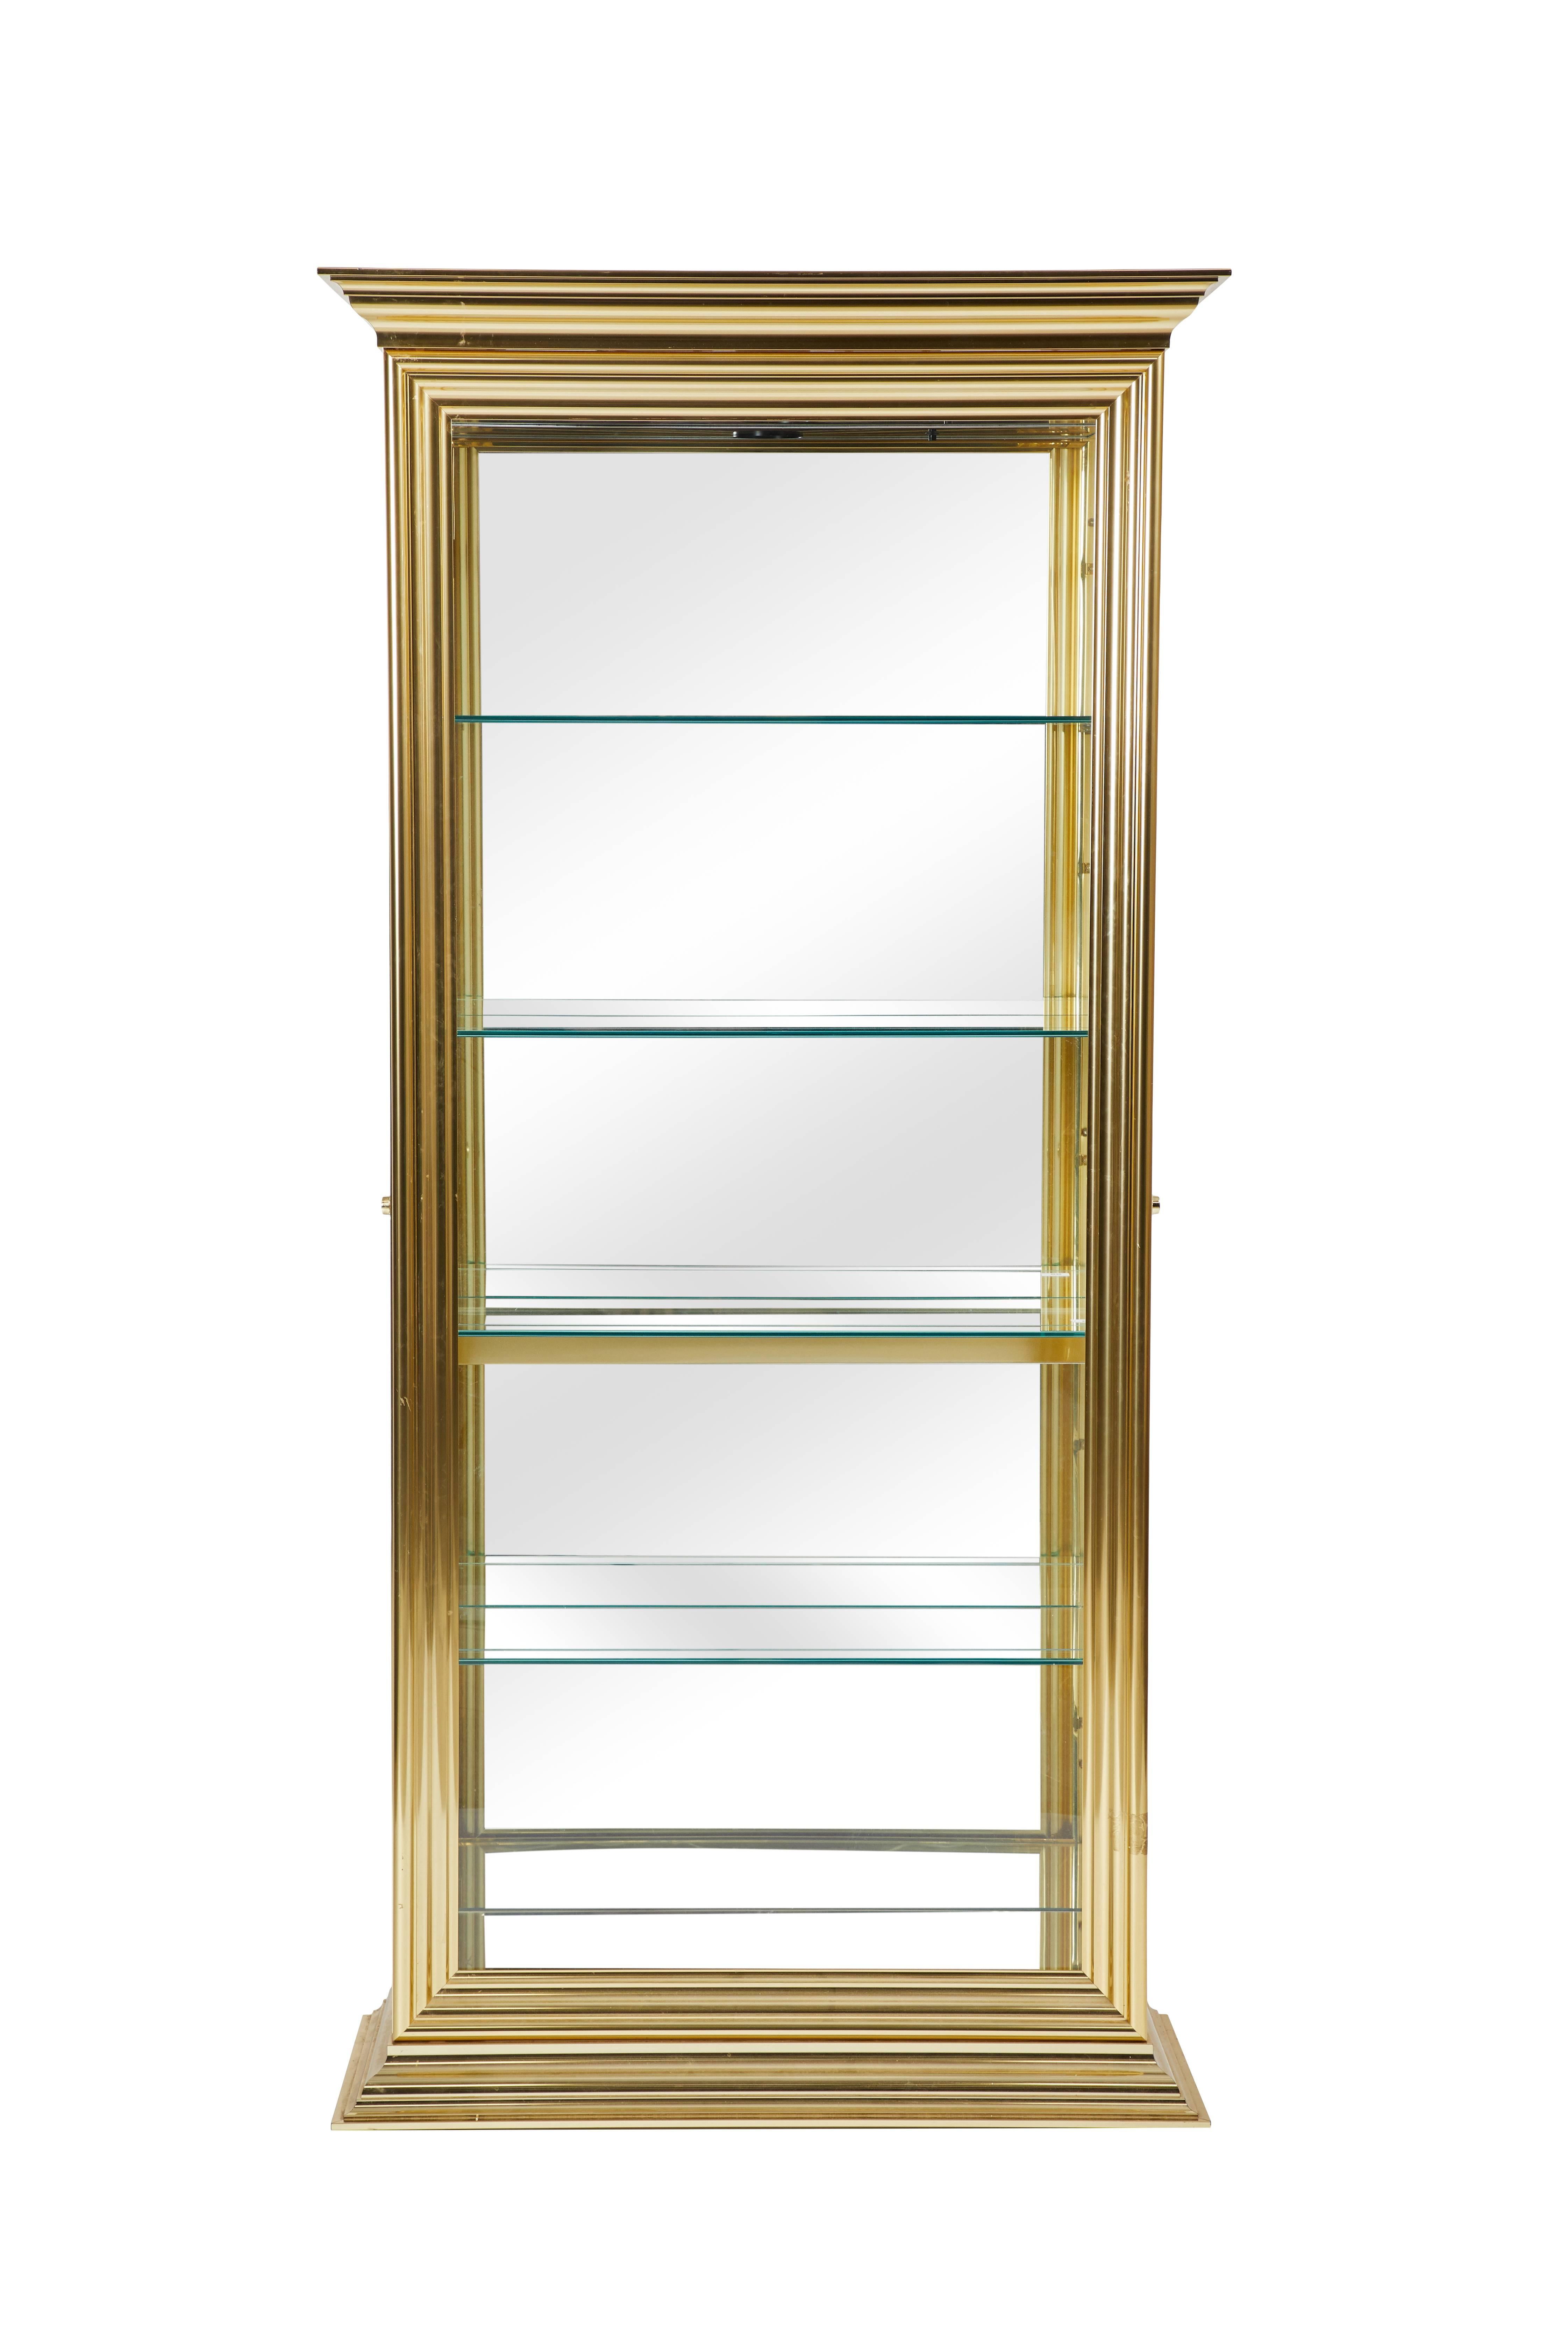 Brass and glass display cabinet in the style of Mastercraft.